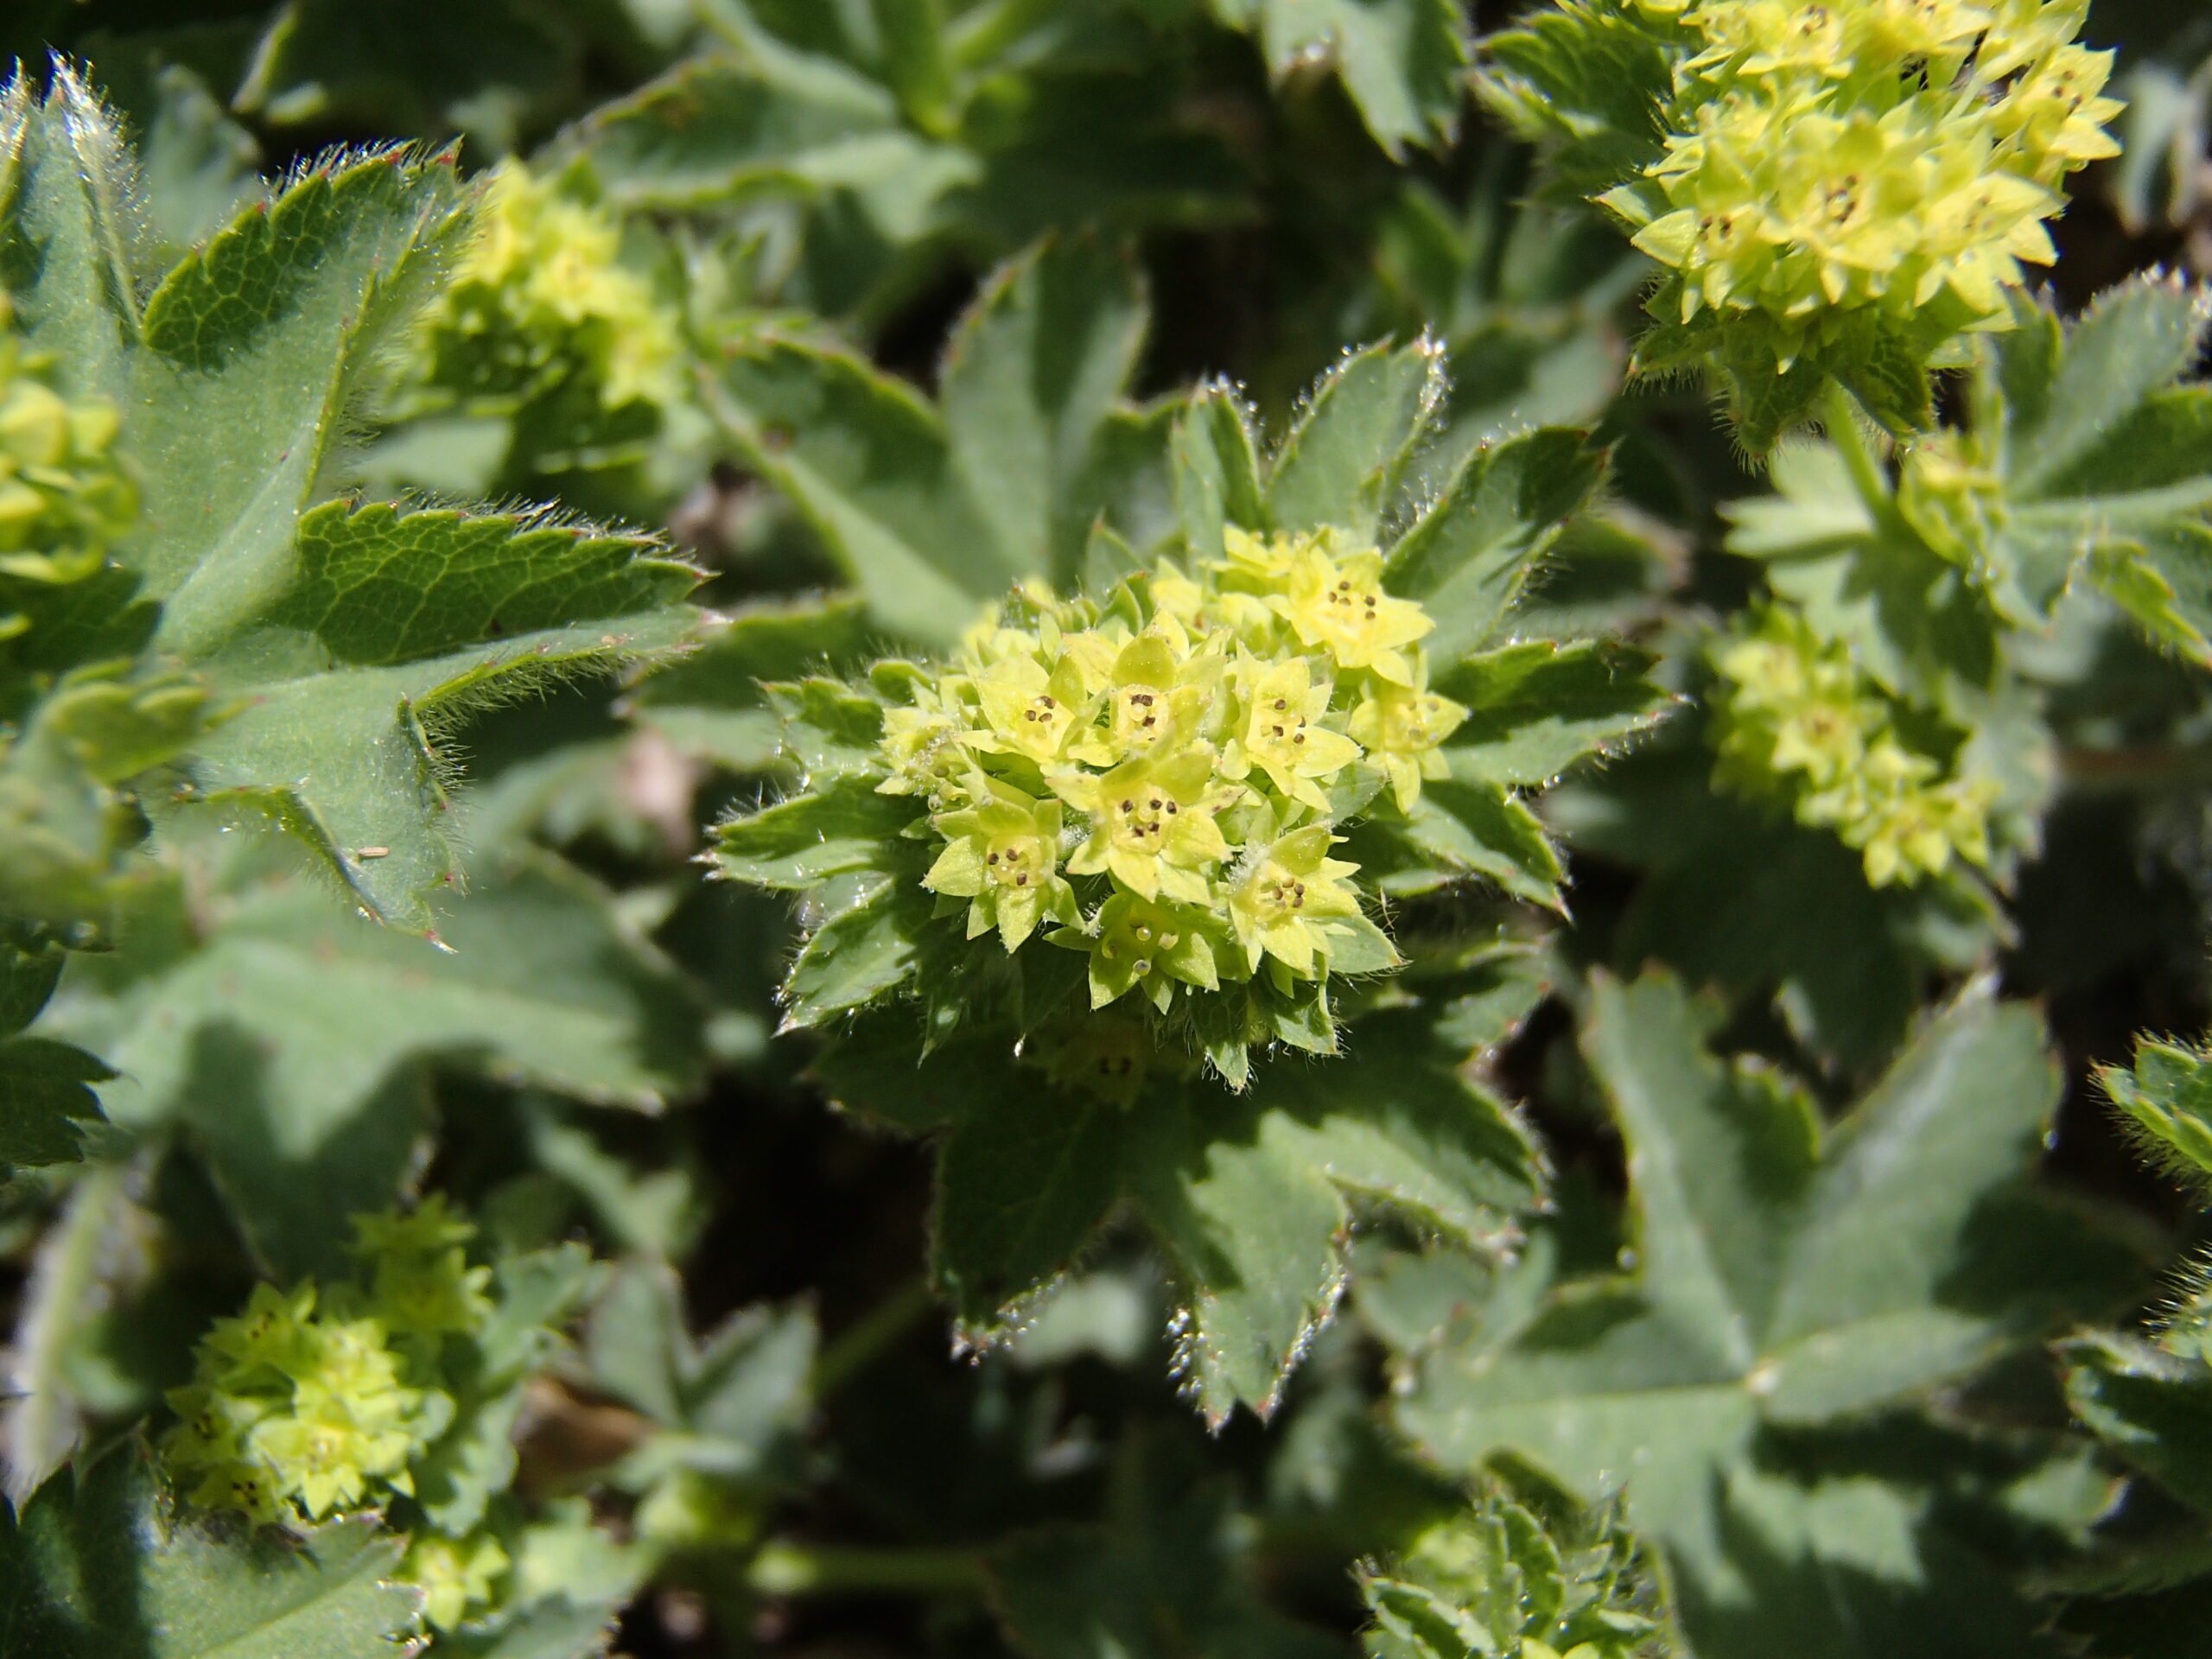 A photograph of the Diadem lady’s mantle plant, green spiky leaves in a star shape.